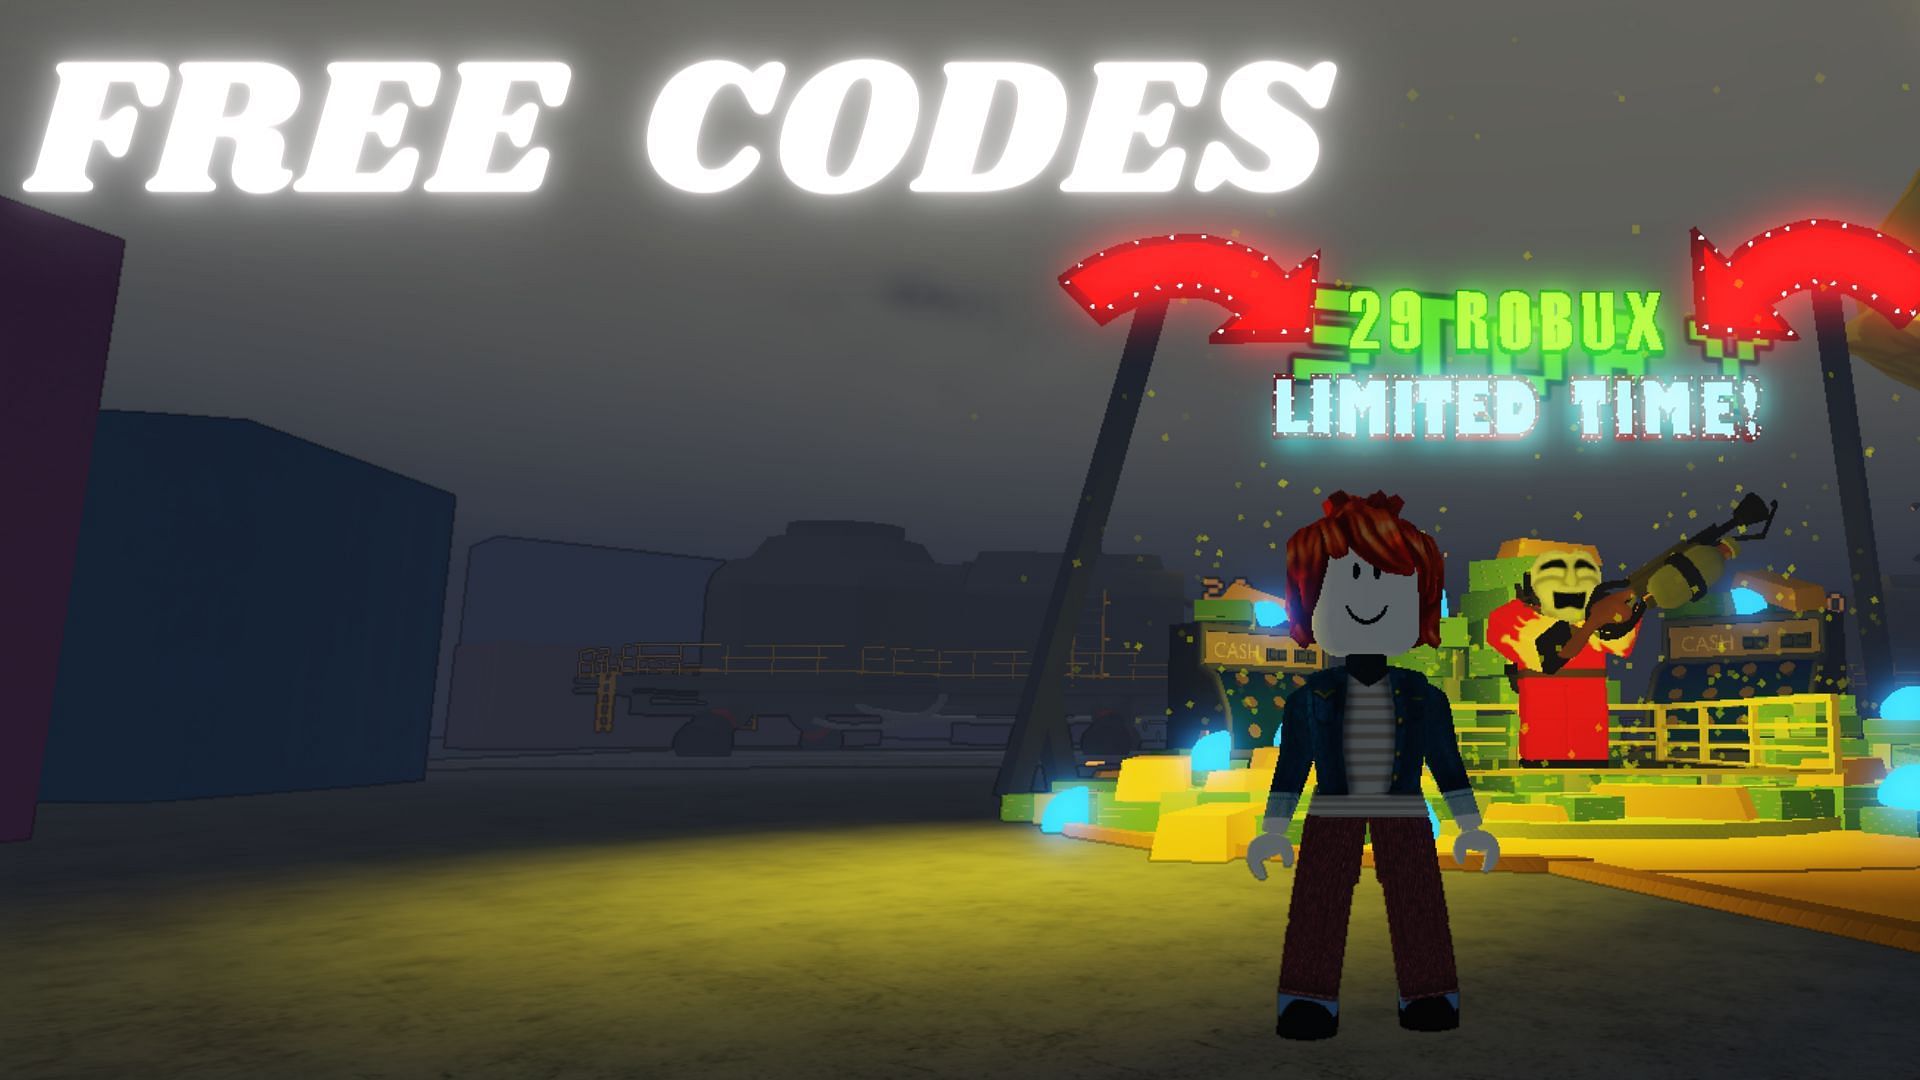 Active codes in Lethal Tower Defense (Images via Roblox and Sportskeeda)